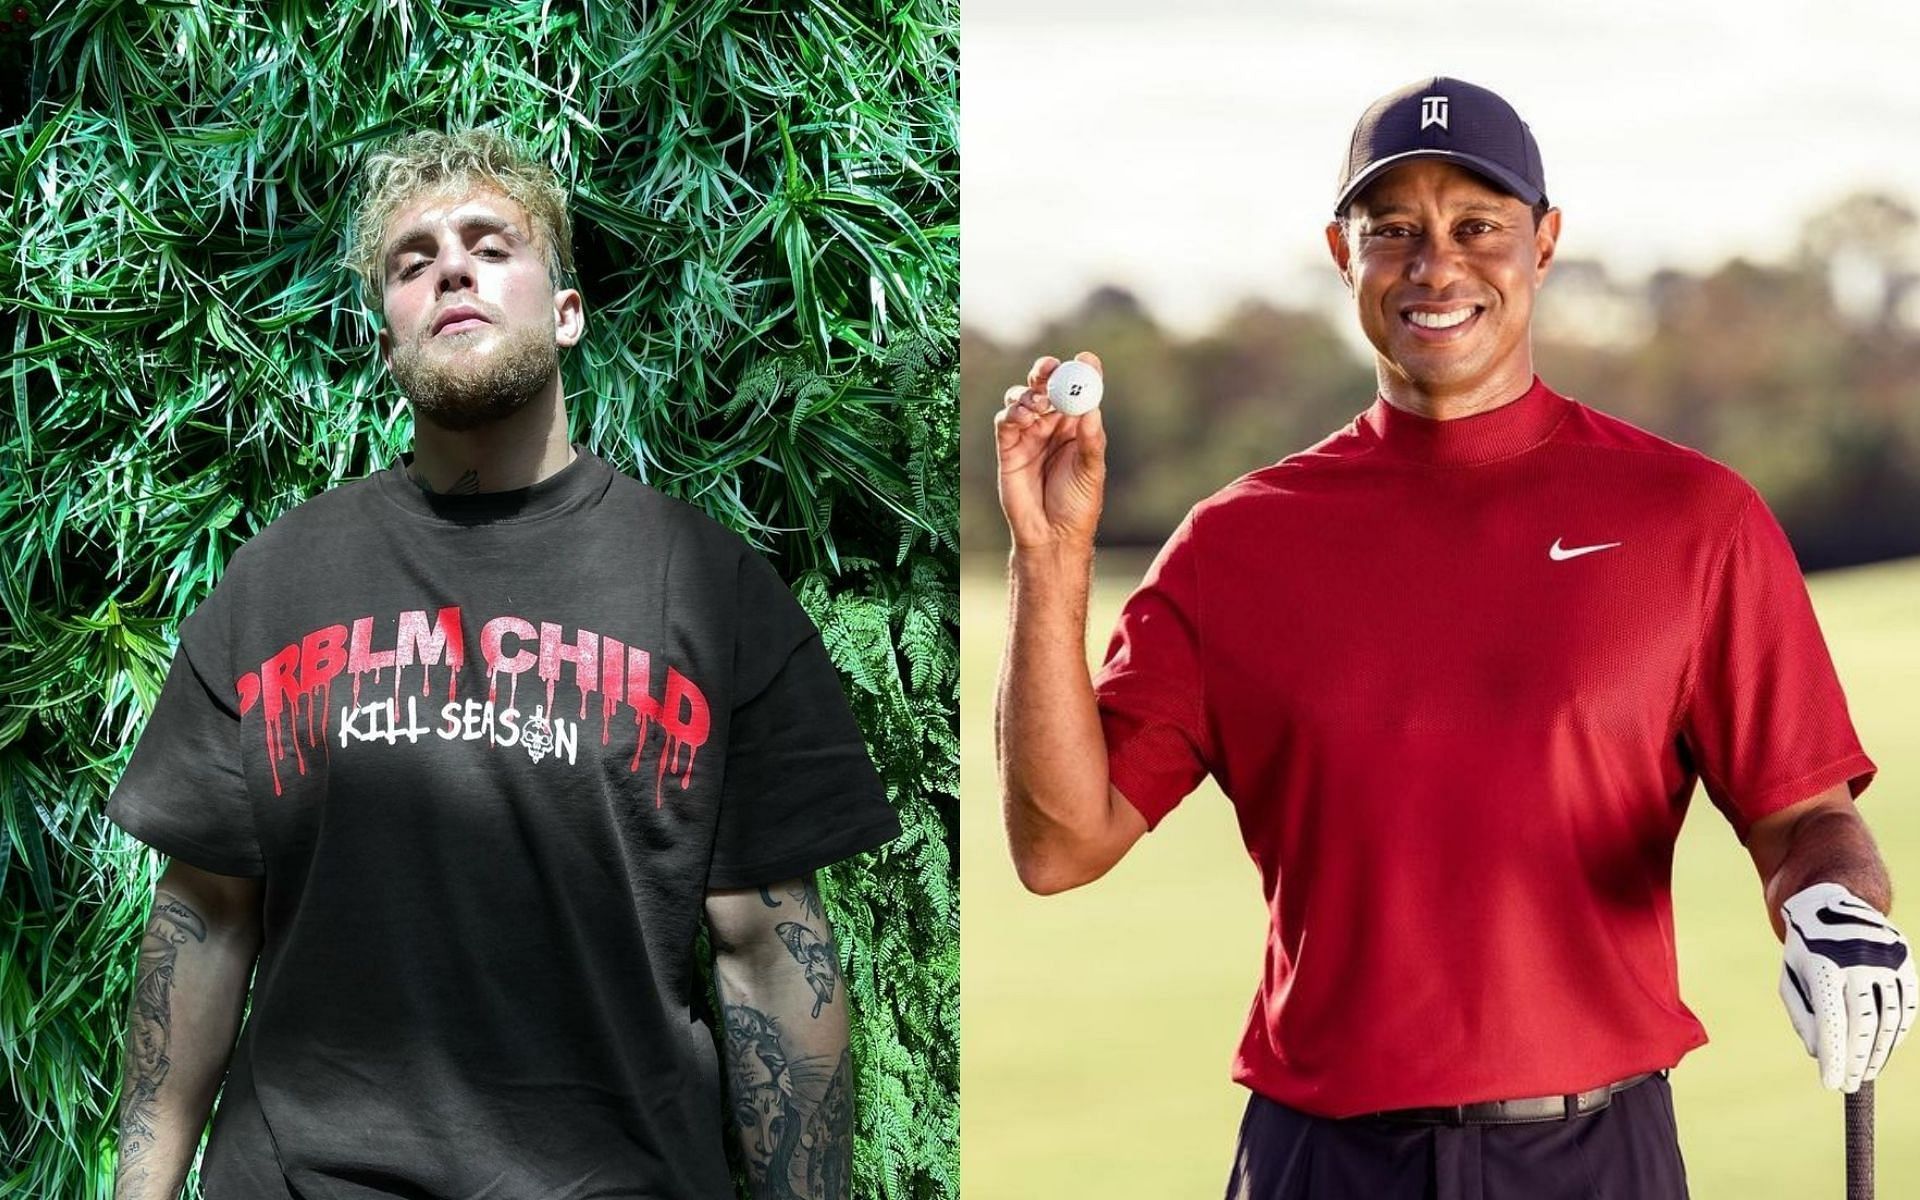 Jake Paul (left) and Tiger Woods (right) [Image Courtesy: @jakepaul and @tigerwoods on Instagram]